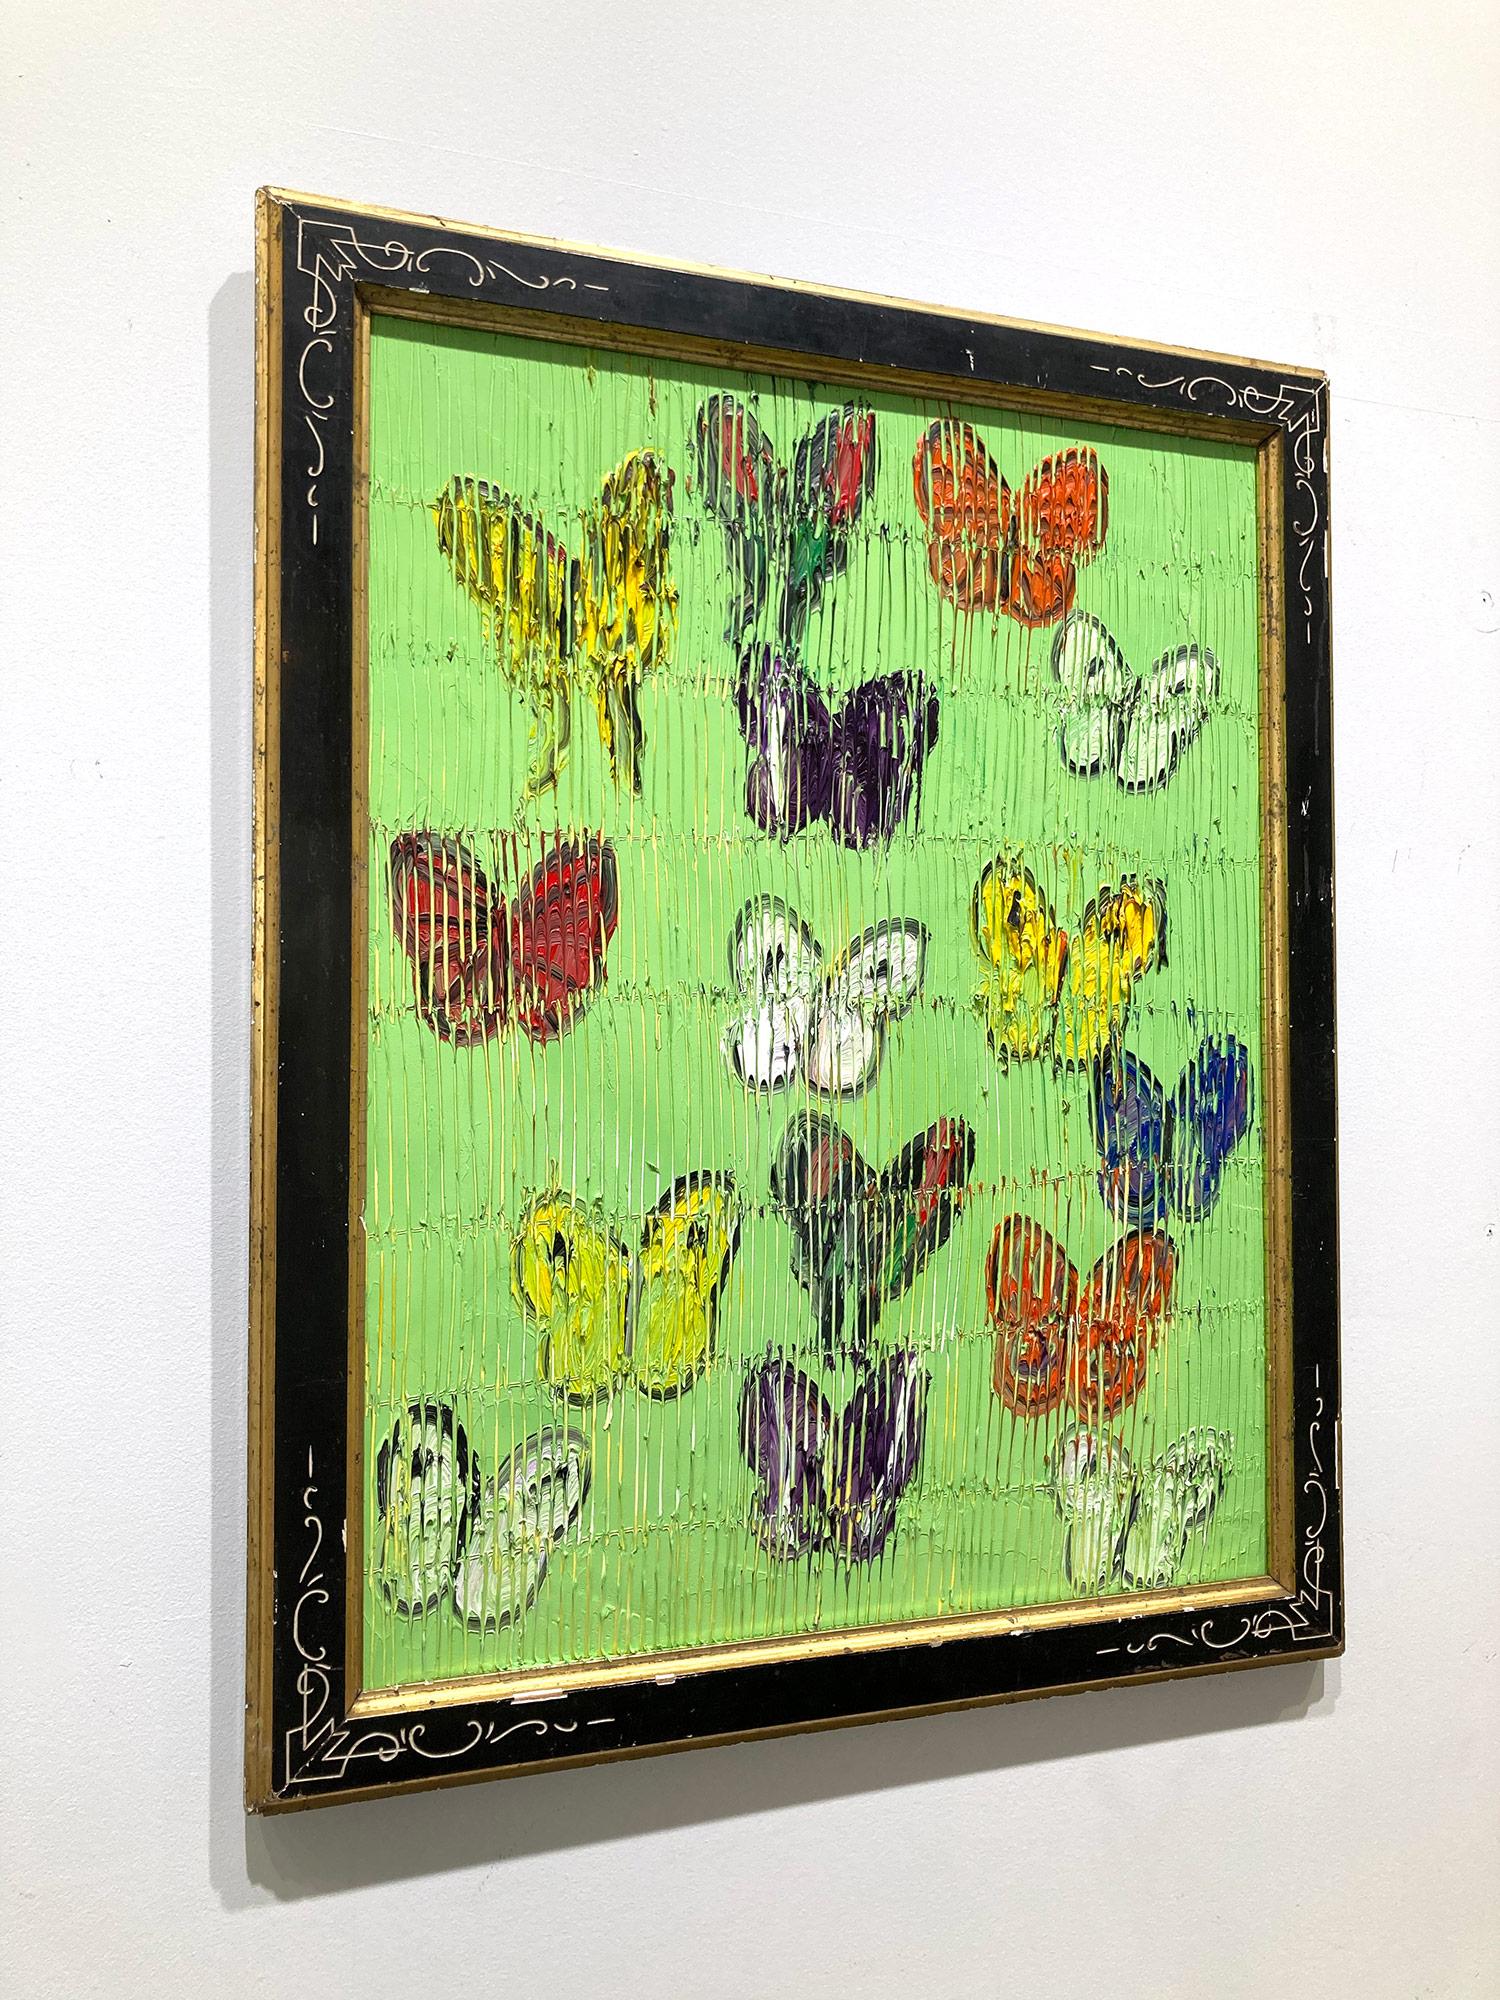 A wonderful composition of one of Slonem's most iconic subjects, Butterflies. This piece depicts multicolor delicate butterflies in ascension placed in a wonderful Paris Green landscape. Slonem traces his famous crosshatch details throughout the